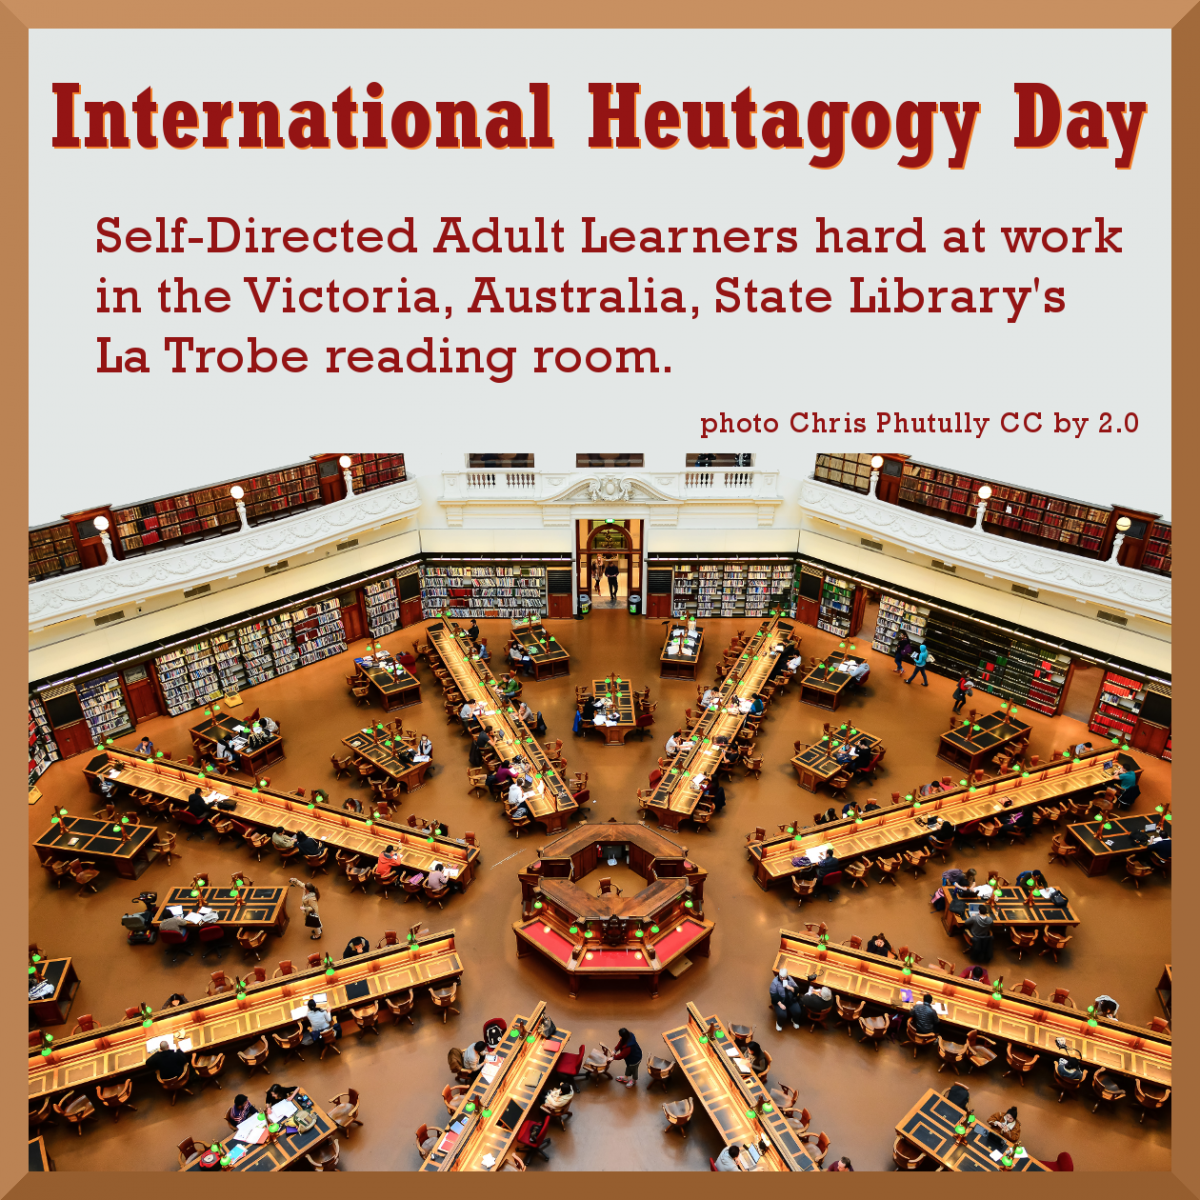 Self-Directed Adult Learners hard at work in Victoria, Australia, State Library's La Trobe reading room.